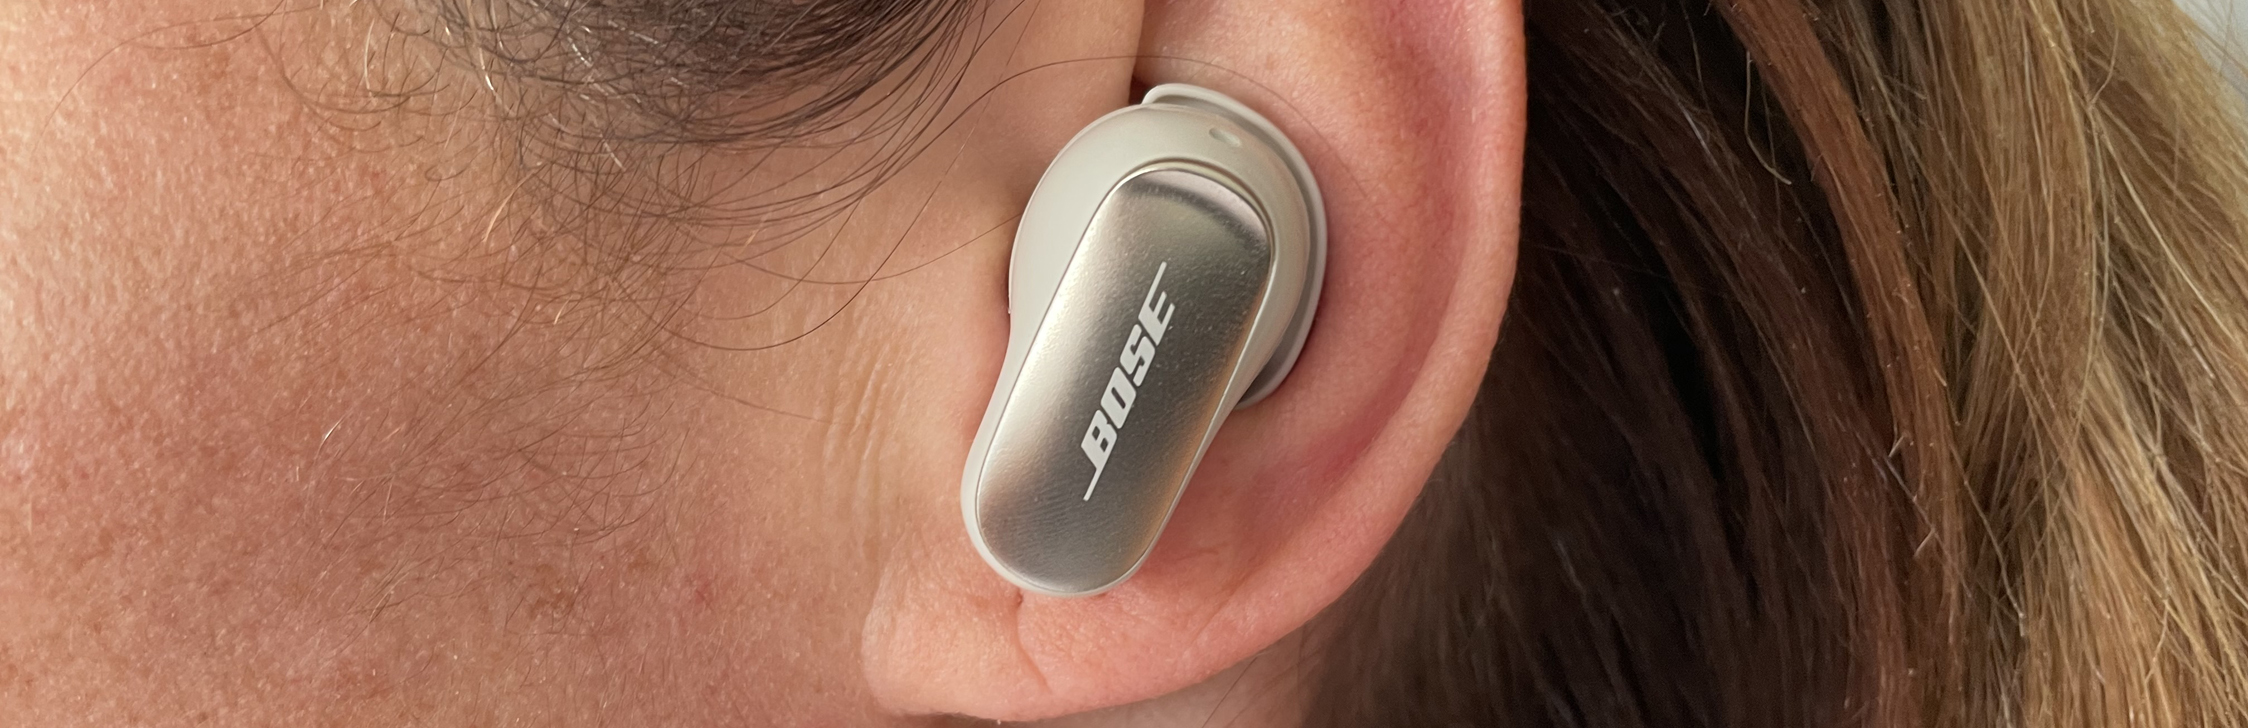 A pinnacle in sound: STACK's Bose QuietComfort Ultra Earbuds ...